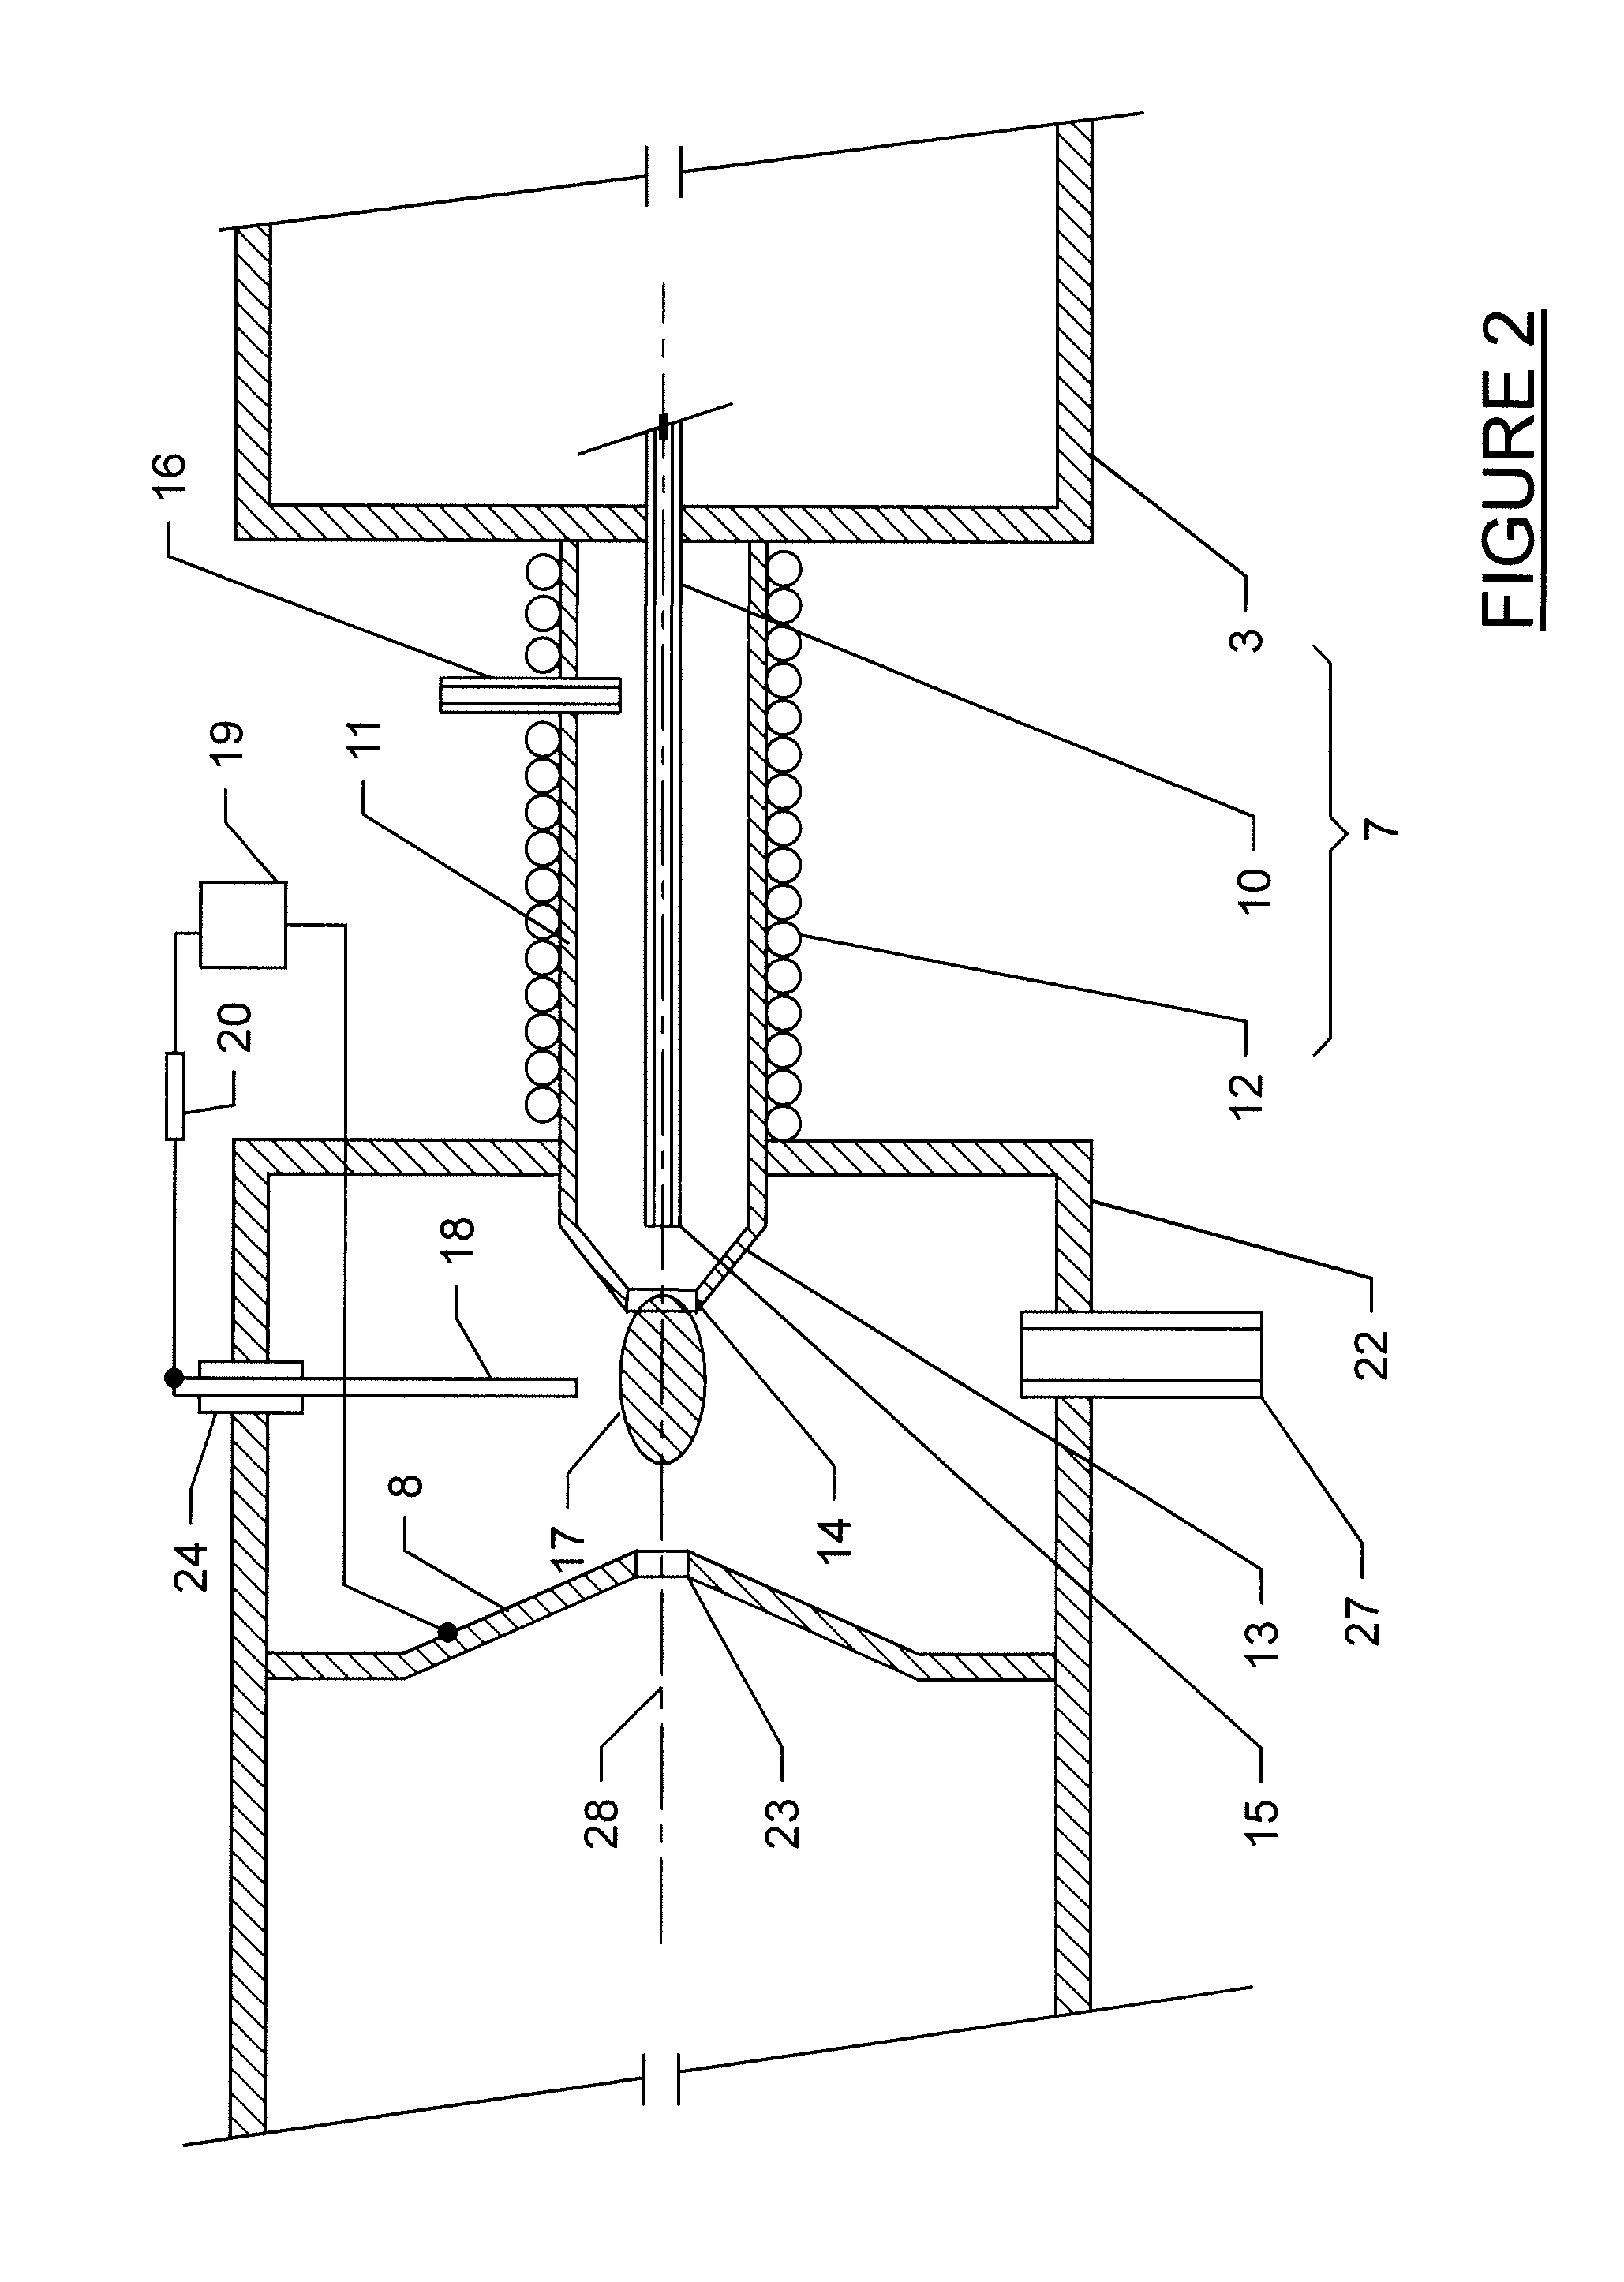 Apparatus And Methods For Gas Chromatography - Mass Spectrometry